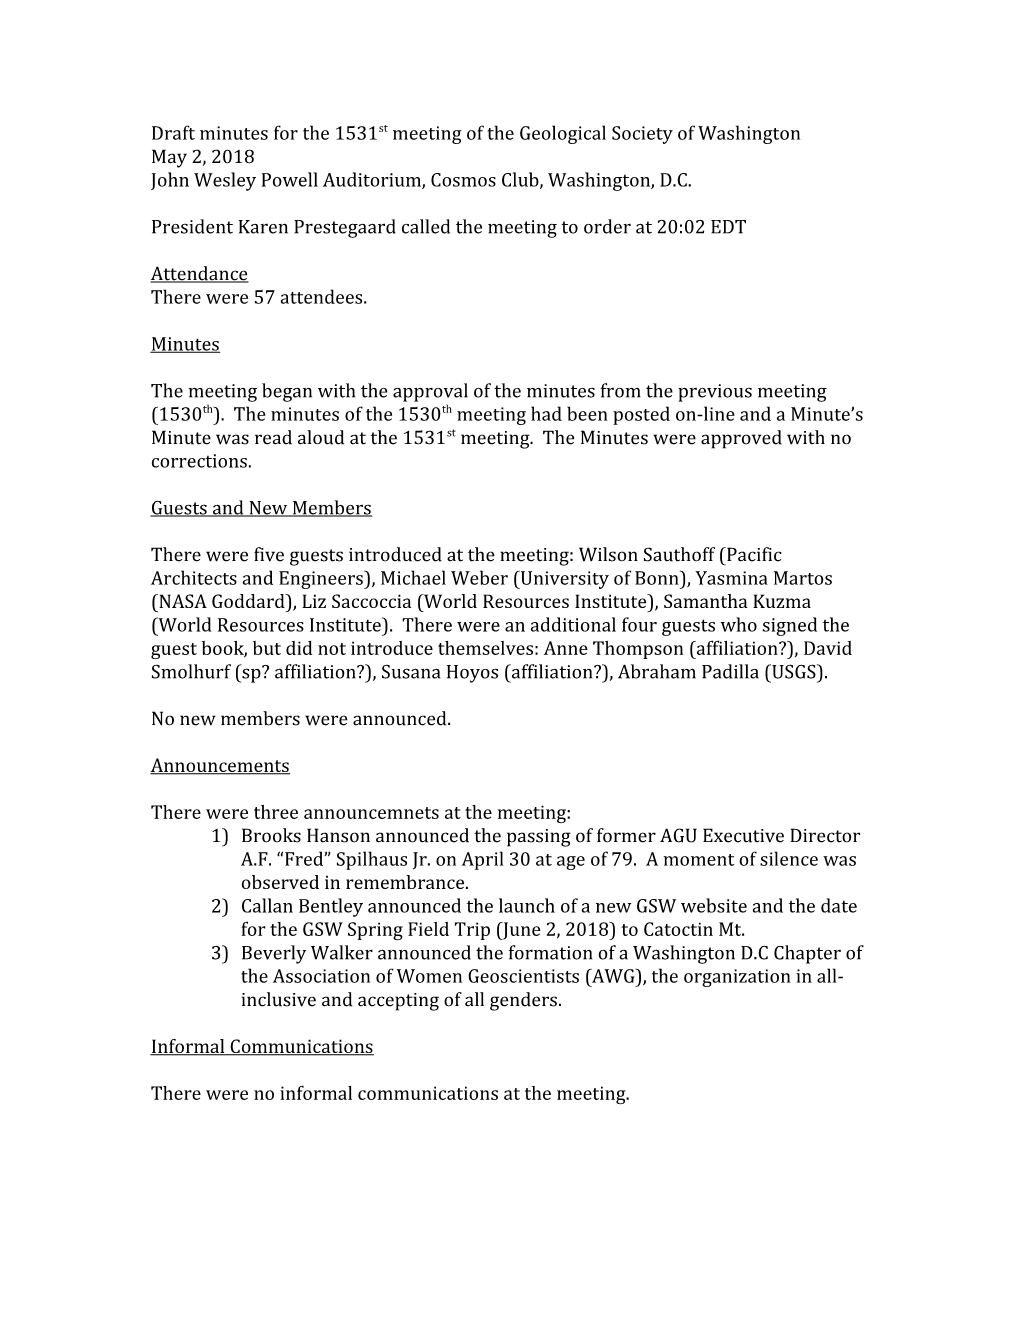 Draft Minutes for the 1531St Meeting of the Geological Society of Washington